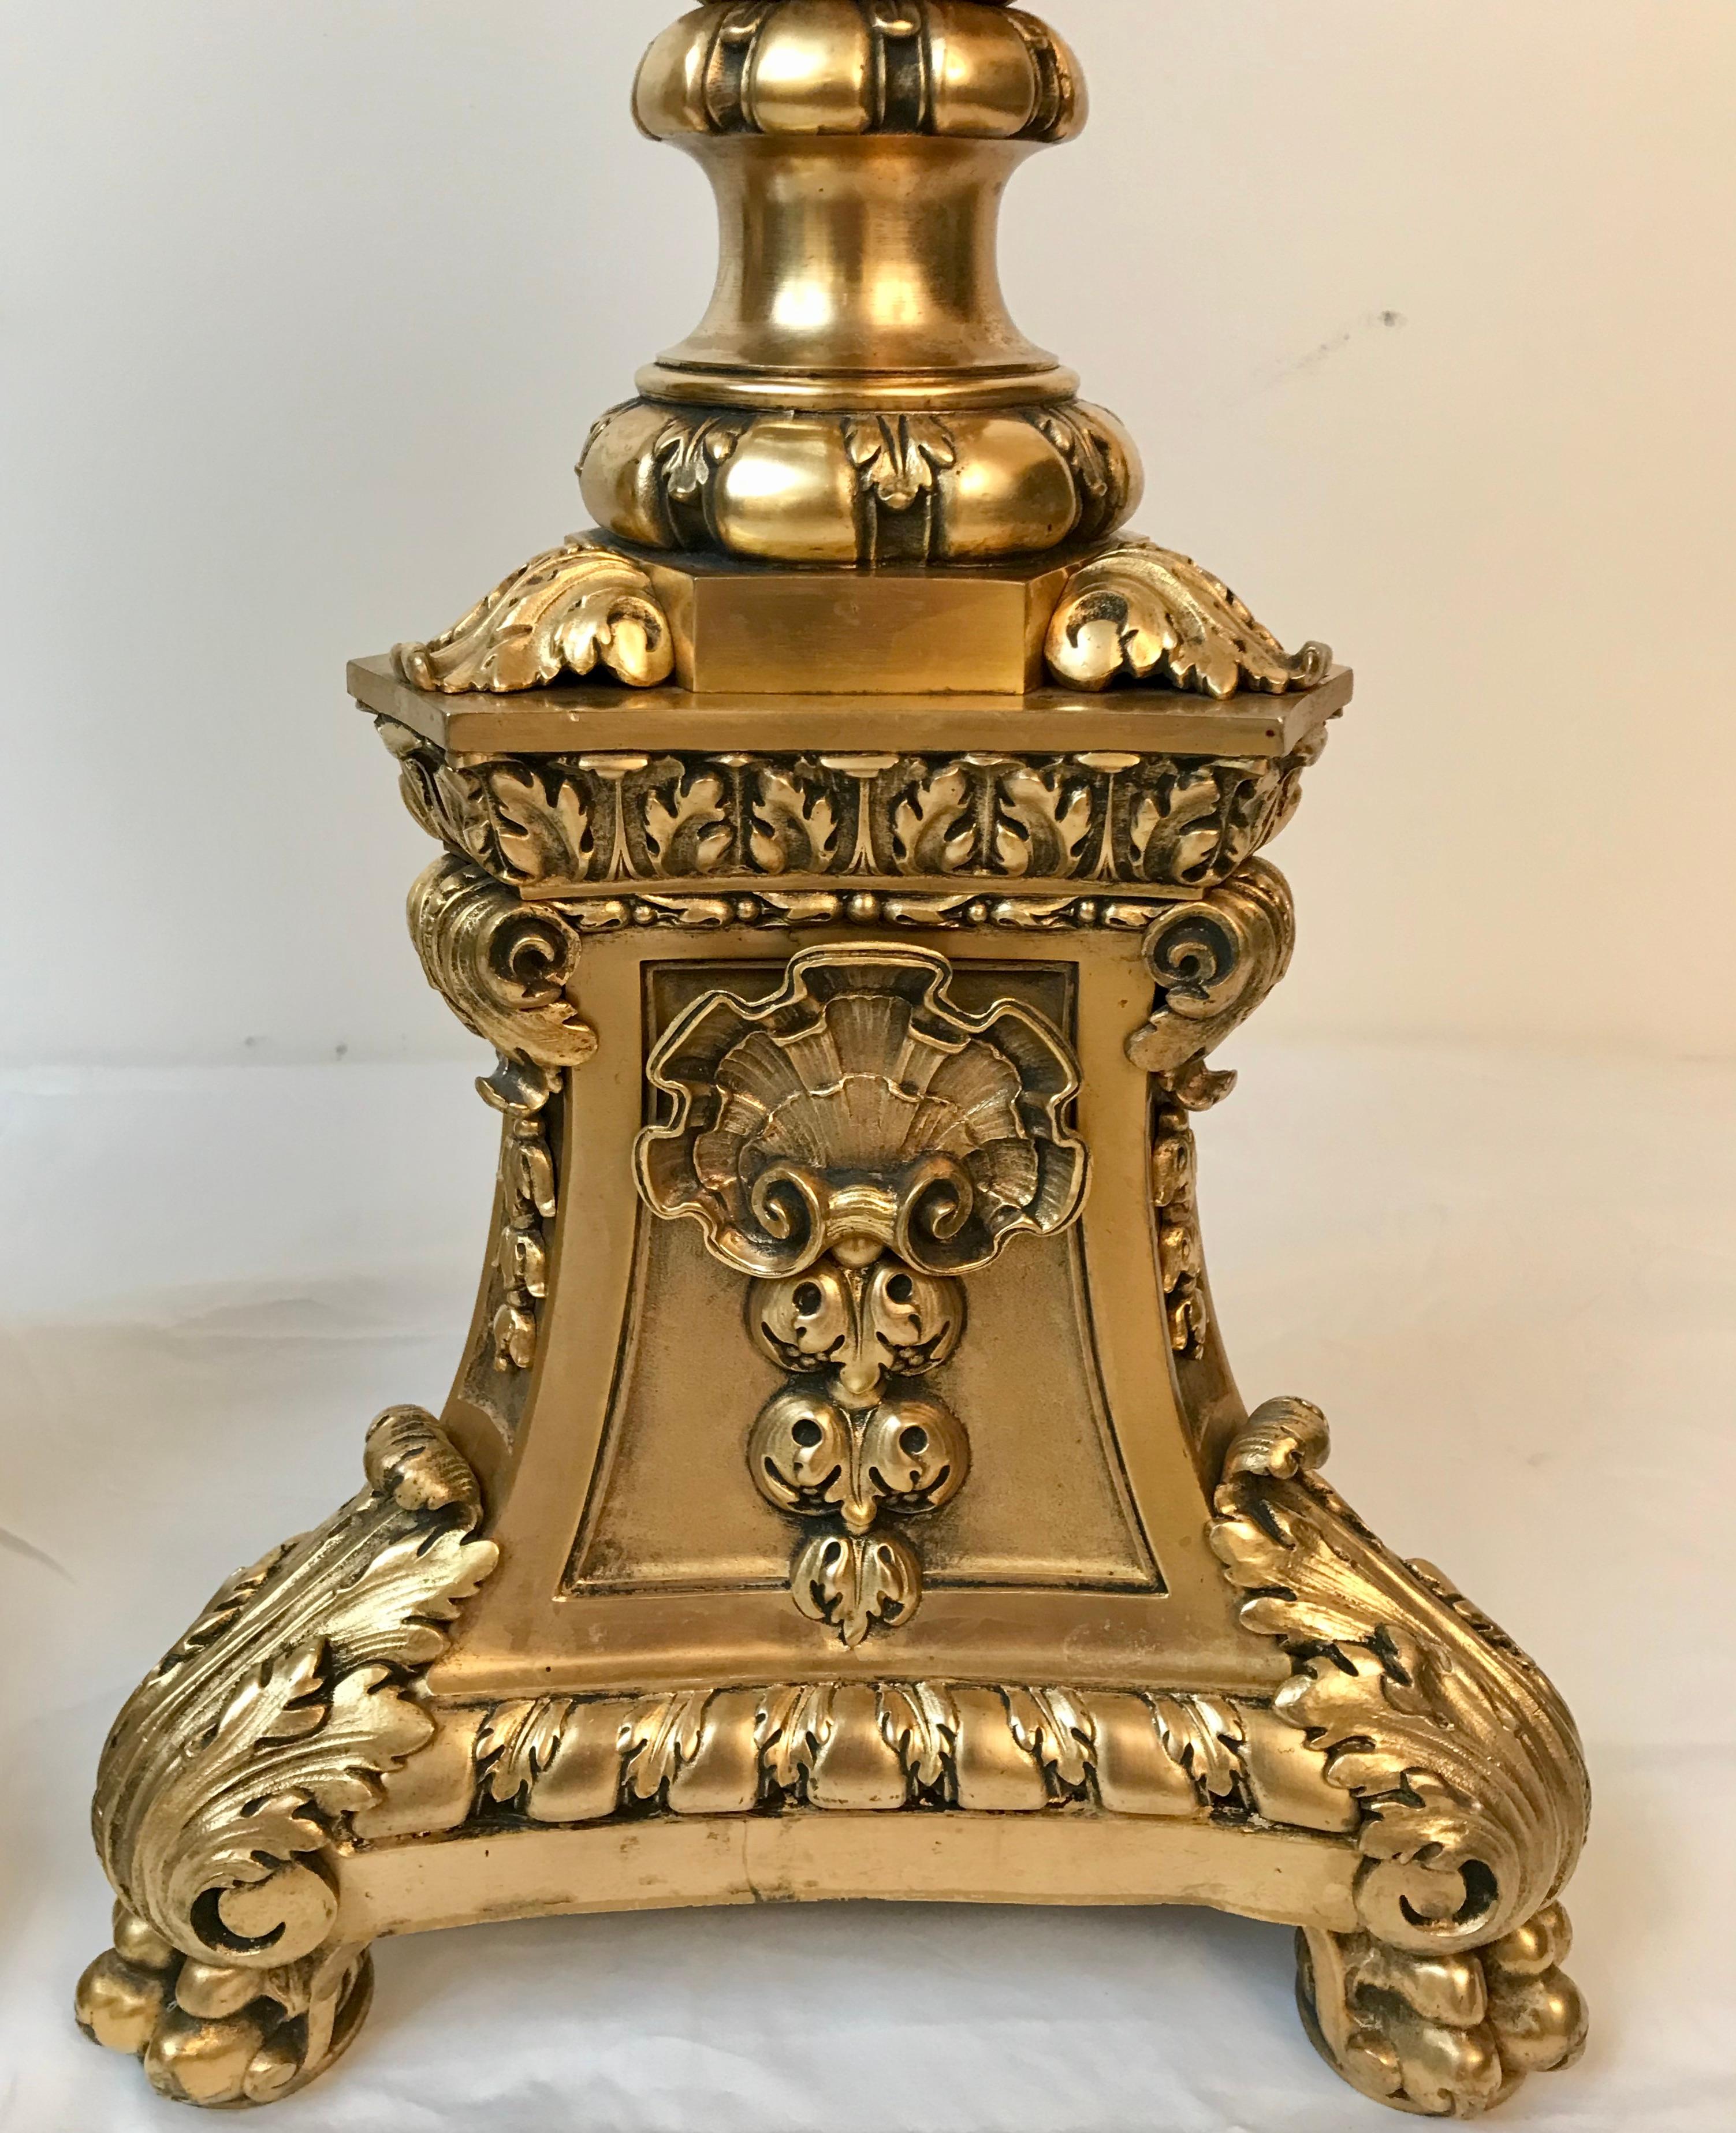 This large and impressive pair of cast and chased gilt bronze andirons are of the finest quality. The triangular plinth bases with canted corners rest on lion paw feet, The andirons feature classical motifs including bellflowers, shells, and